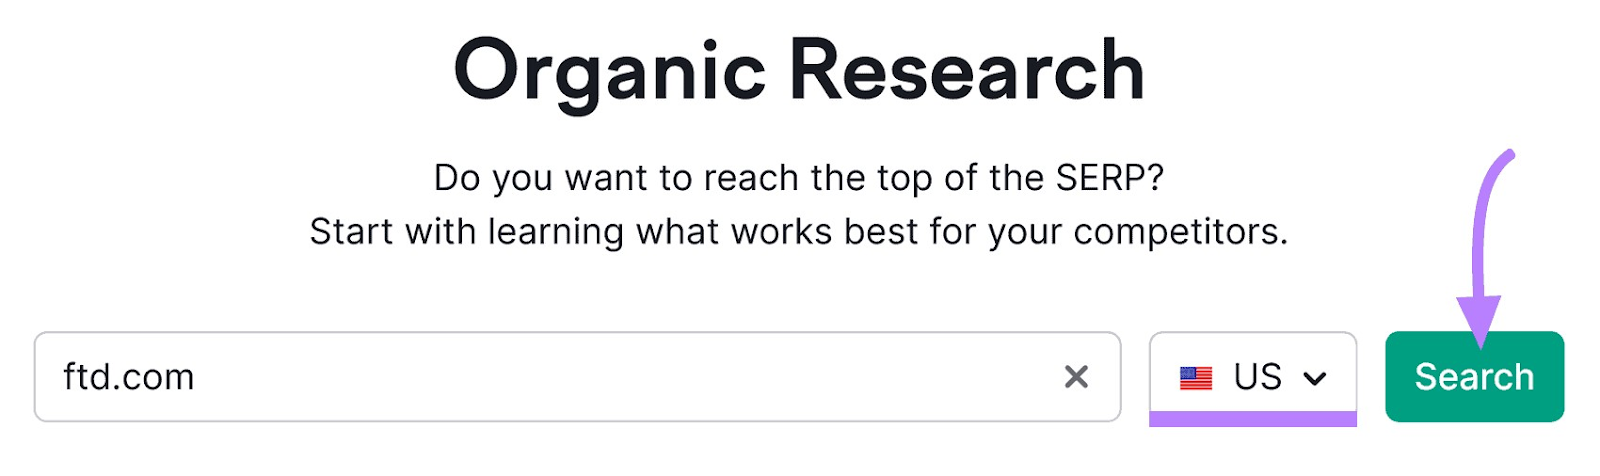 Organic Research search bar with "Search" button highlighted